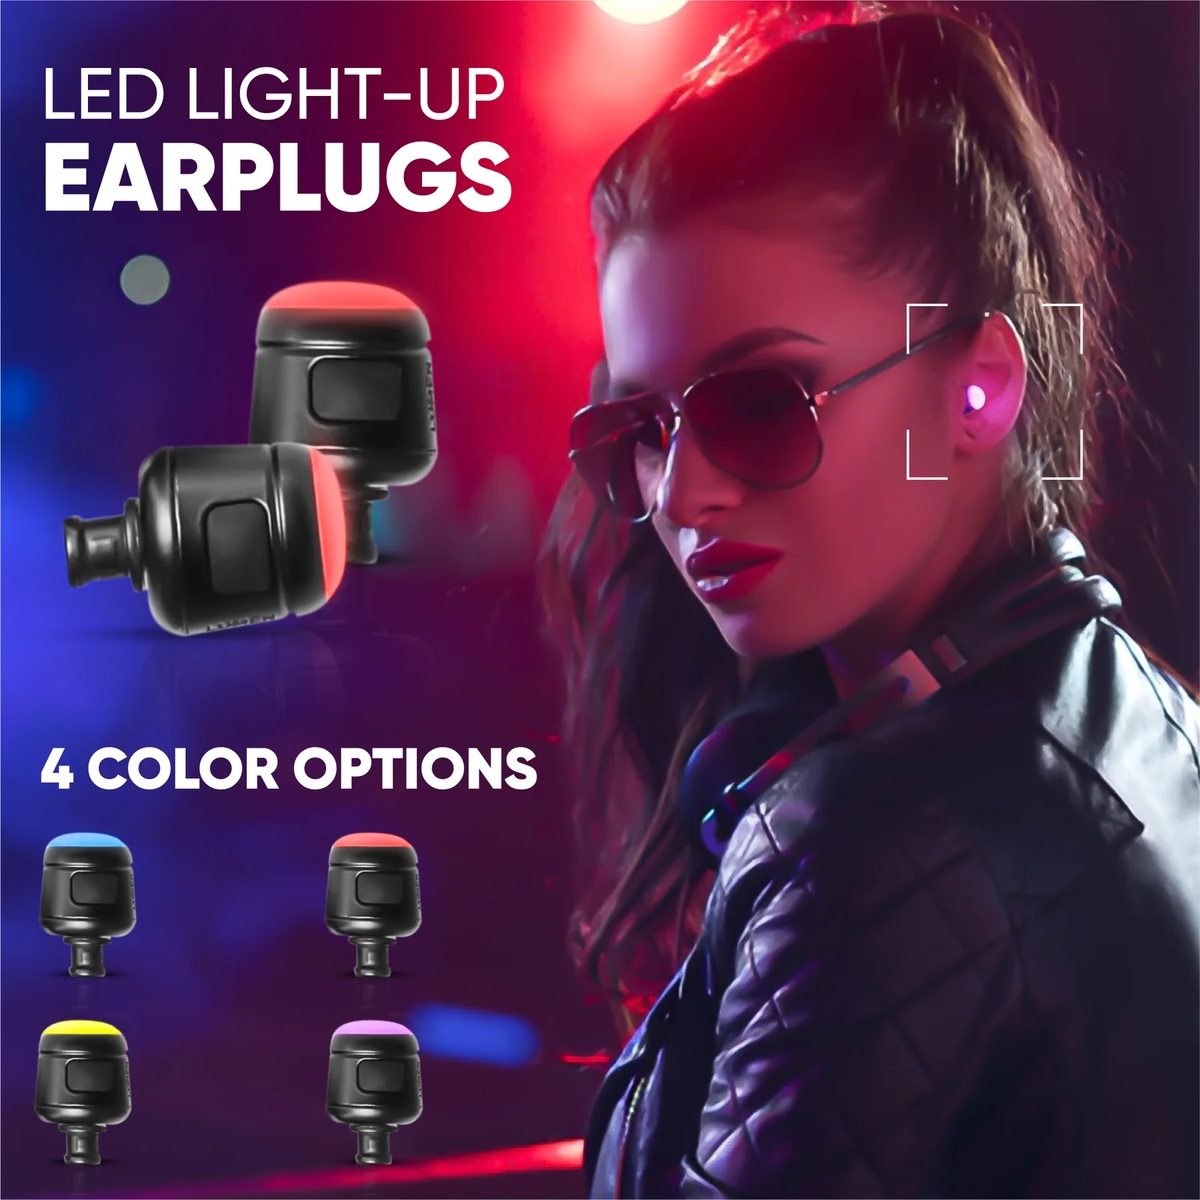 Rave in Style with New Earplugs: Must-Have Rave Accessories